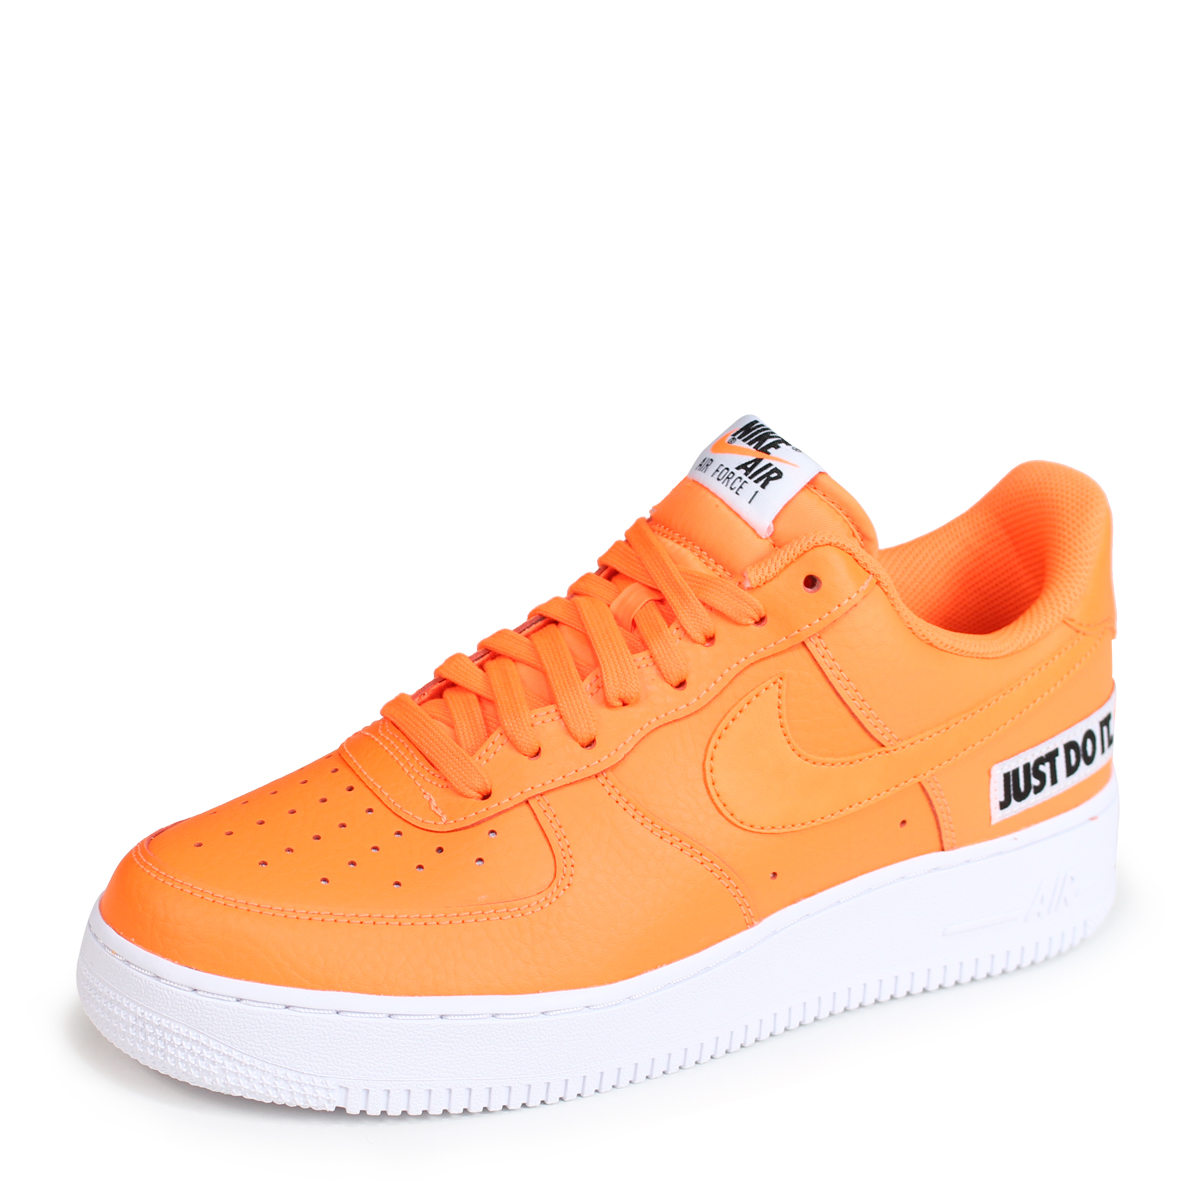 Just Do It Nike 靴 Air Force 1 Top Quality Cadbe C474b